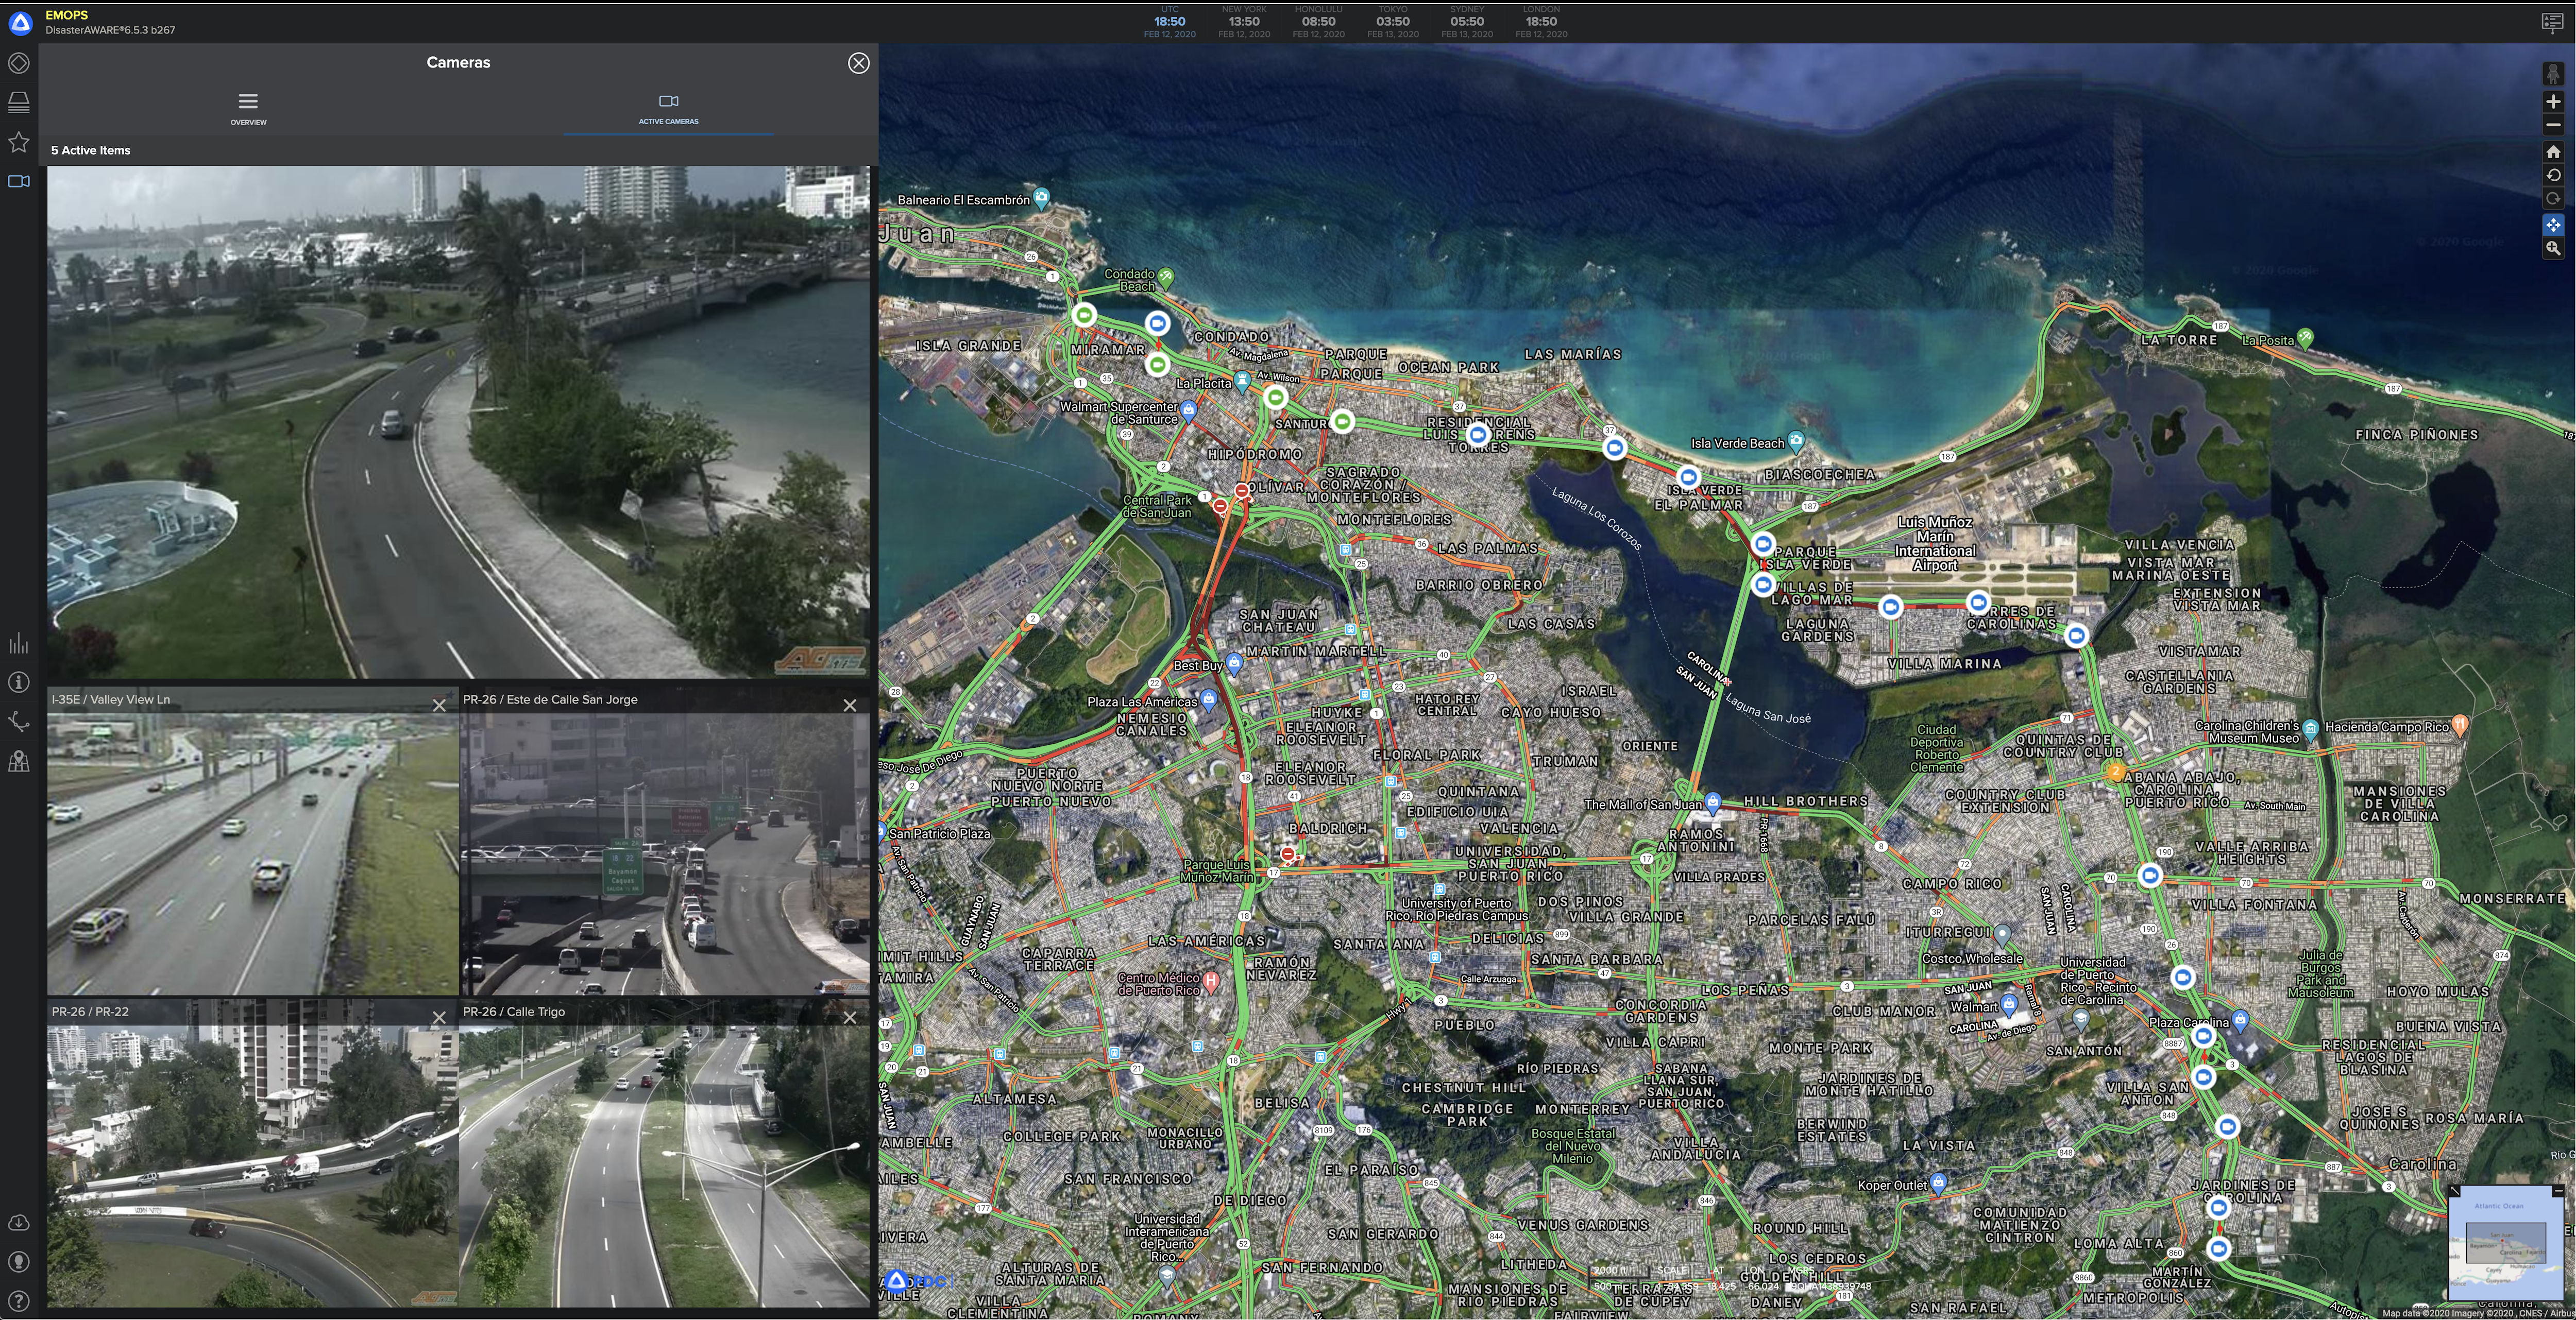 Visualization of road conditions in San Juan, Puerto Rico